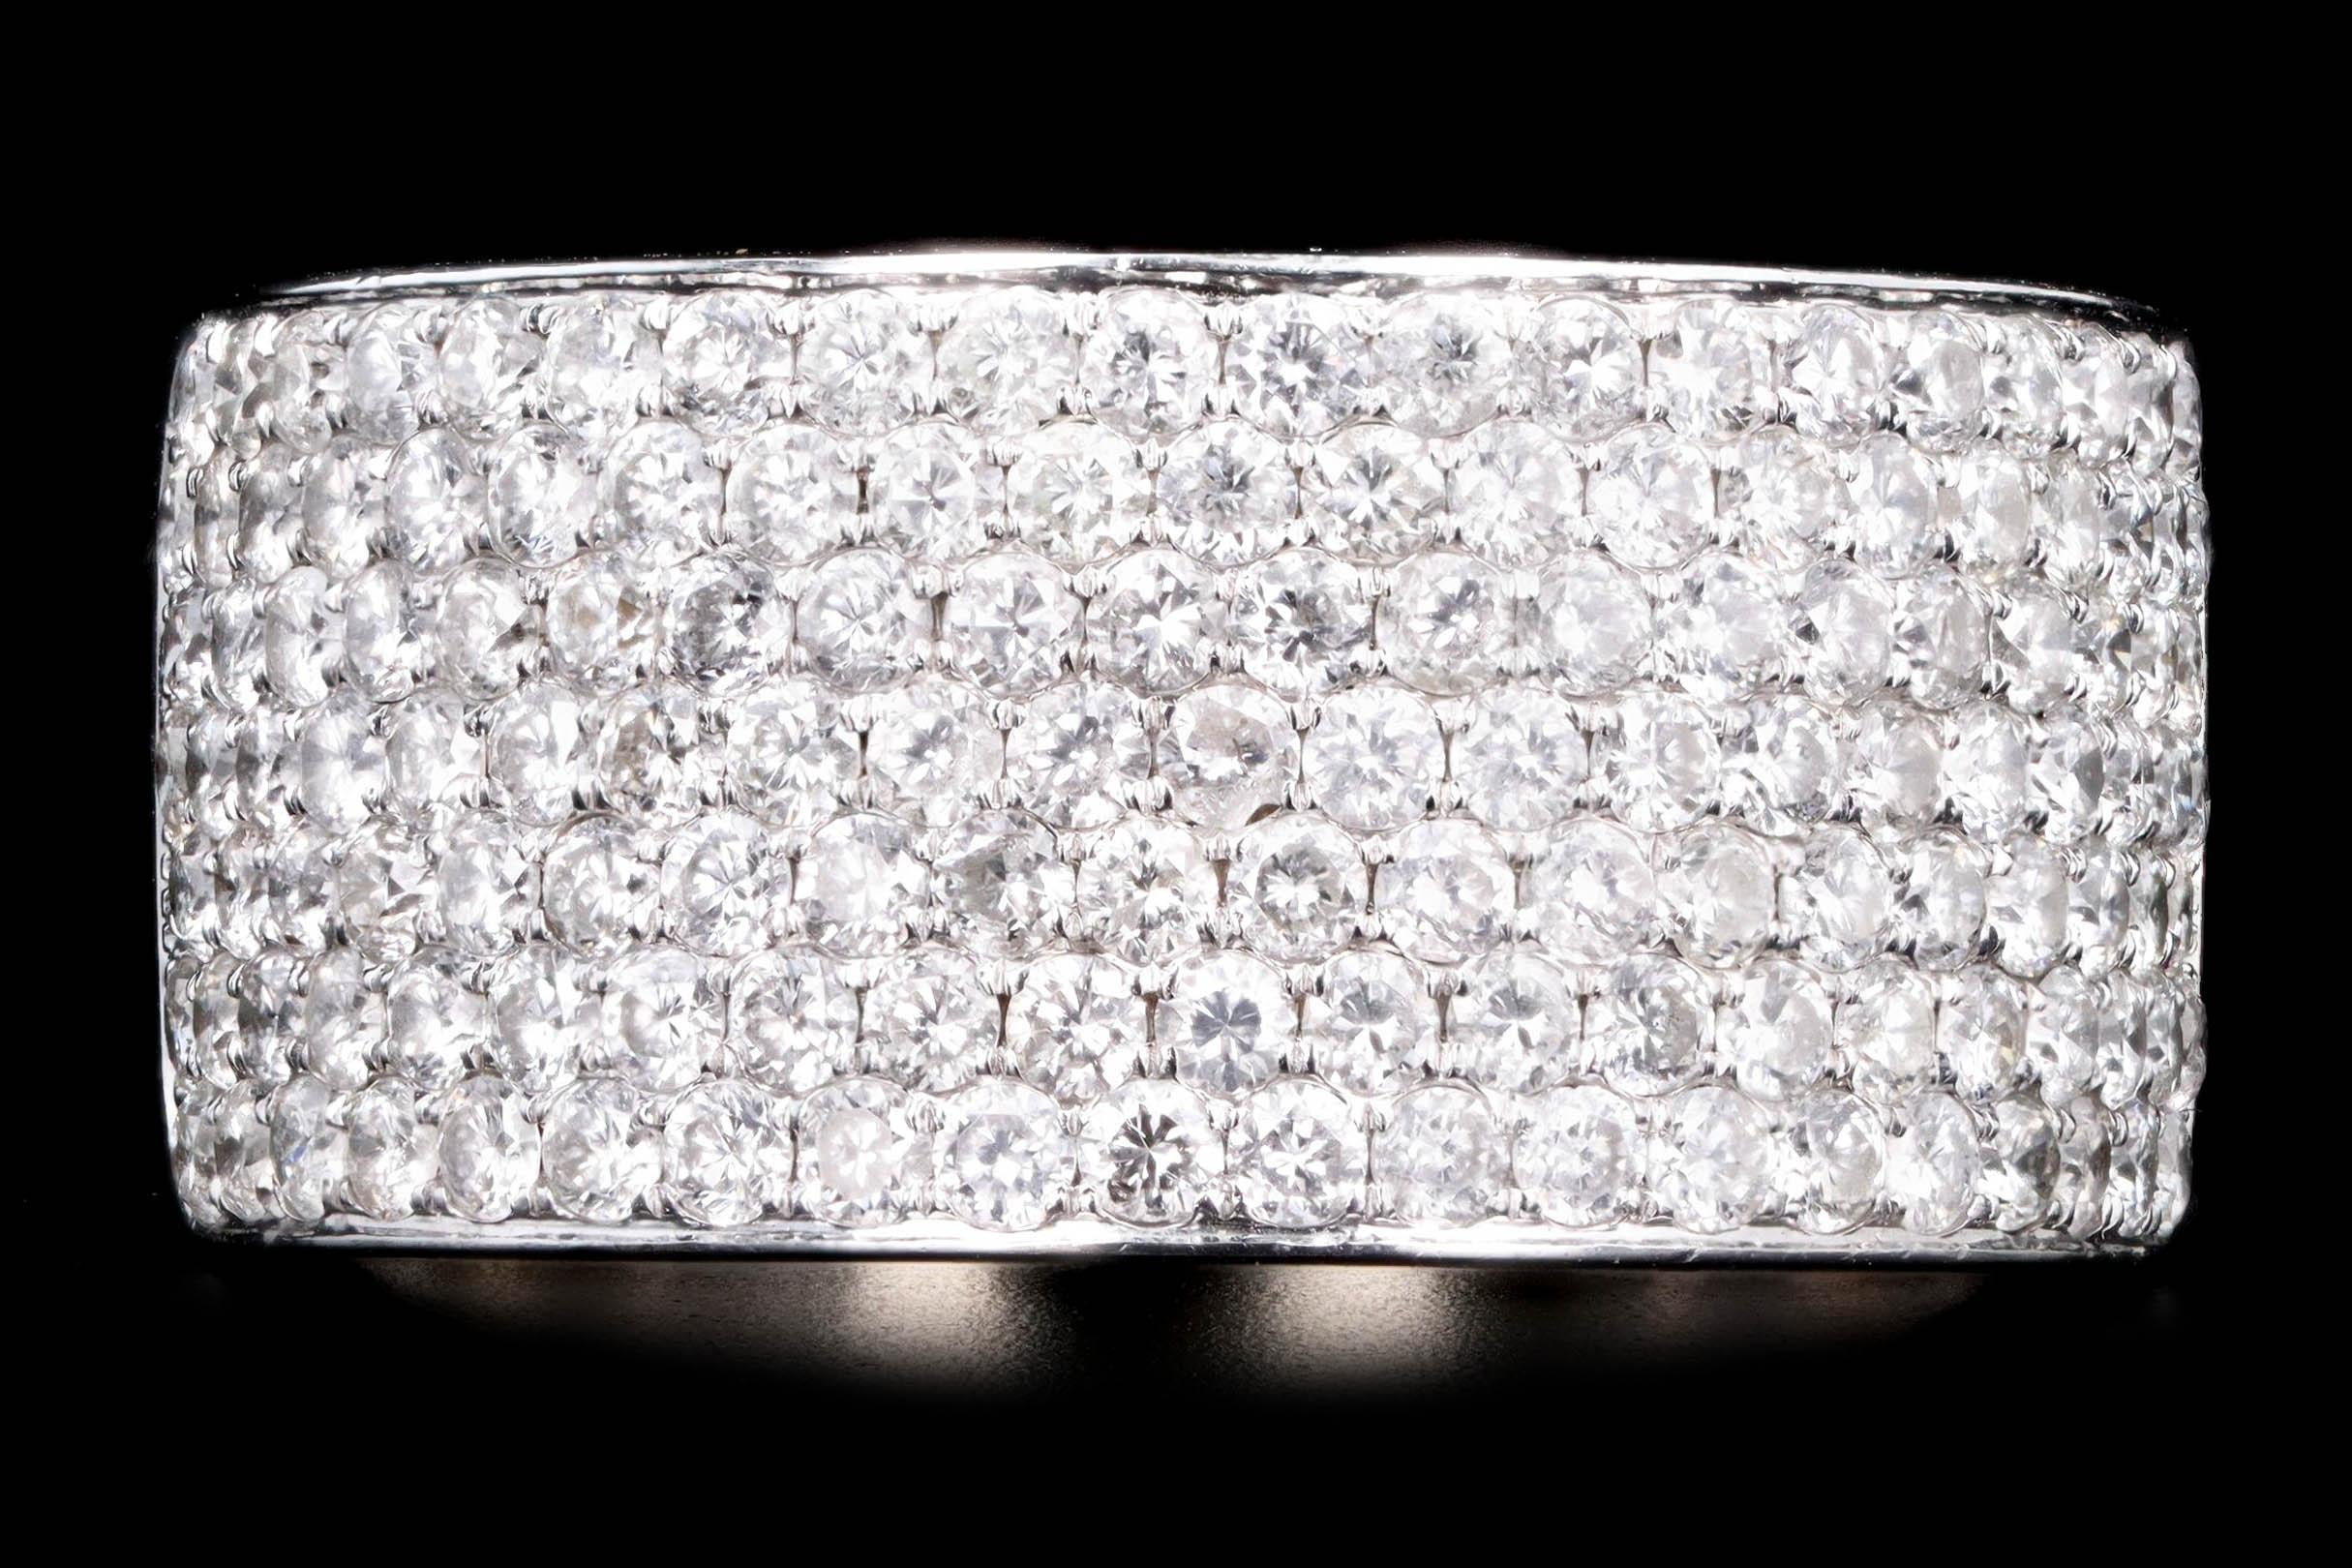 Era: Modern

Composition: 14K White Gold

Primary Stone: One Hundred Forty Three Round Brilliant Cut Diamonds

Total Carat Weight: Approximately 2.0 Carats

Color/Clarity: H-I / SI1-2

Ring Size: 8.5

Ring Weight: 7.8 Grams

Item Barcode: 231454